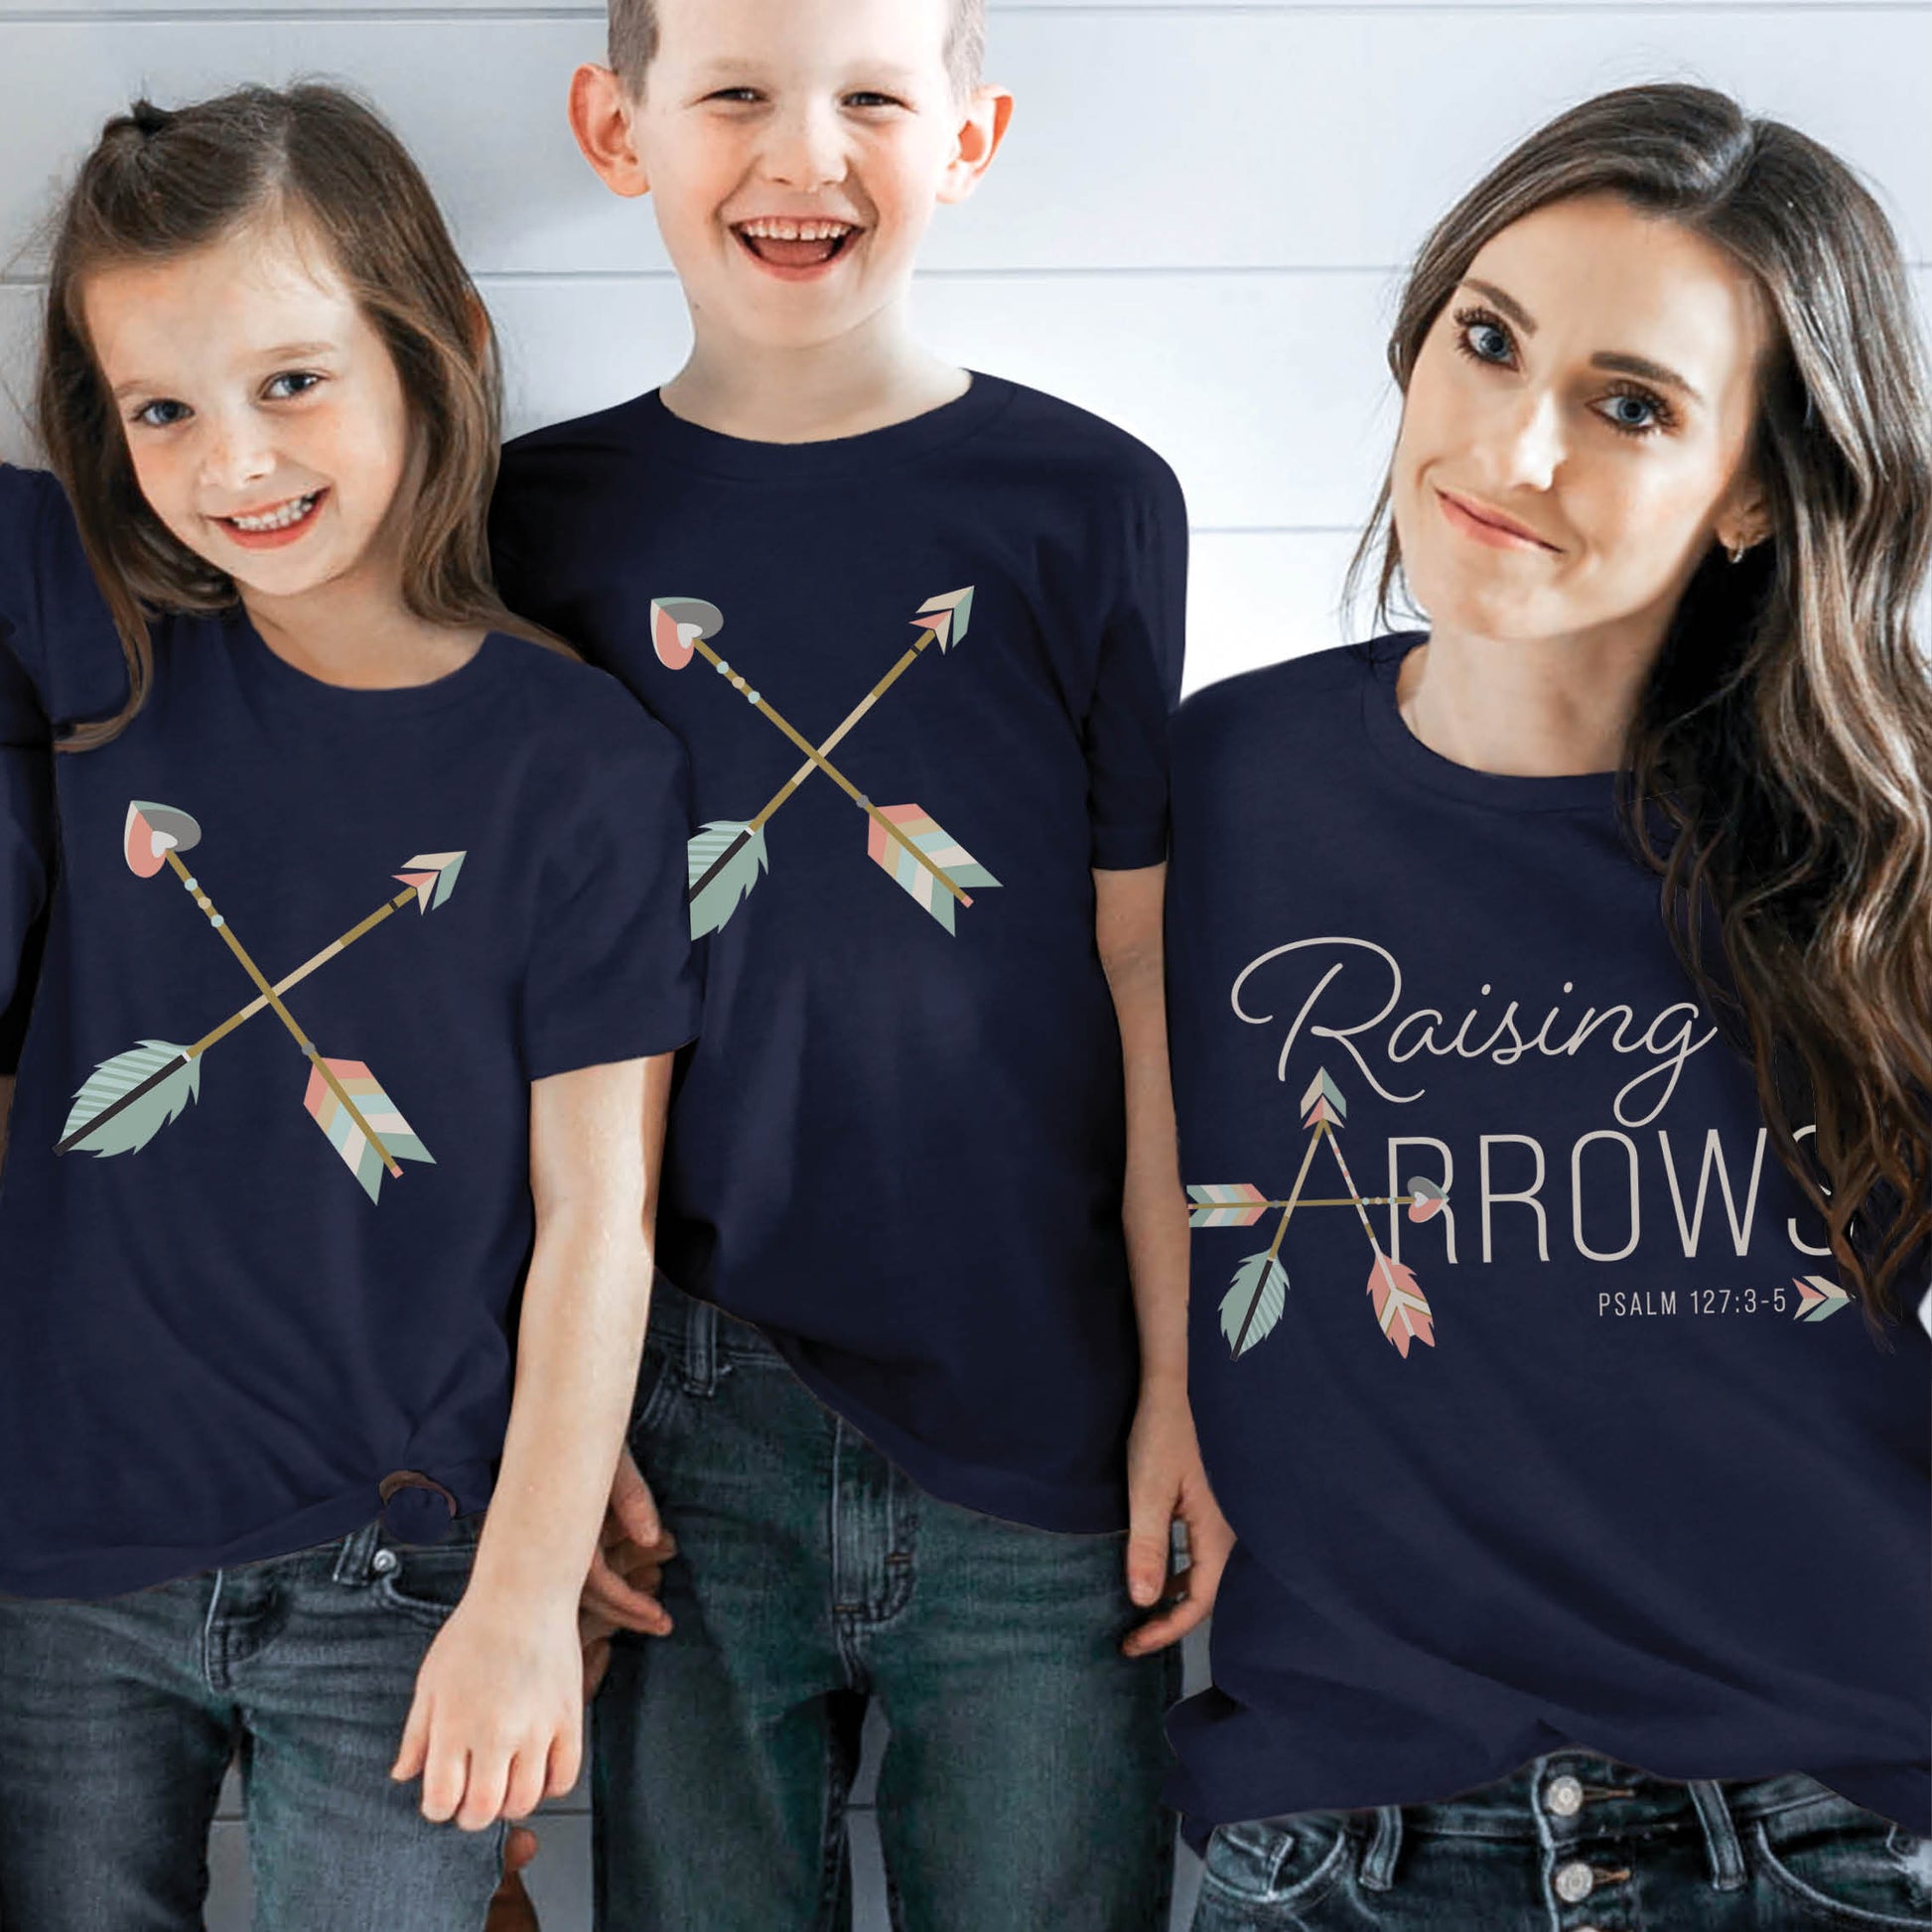 Navy Blue and pastel boho arrow Christian aesthetic faith-based t-shirt and matching mommy-and-me youth & toddler boys and girls tee with Psalm 127:3-5 bible verse quote that says "Raising Arrows" blessed is the one with a quiver full of children, perfect for homeschool moms and kids